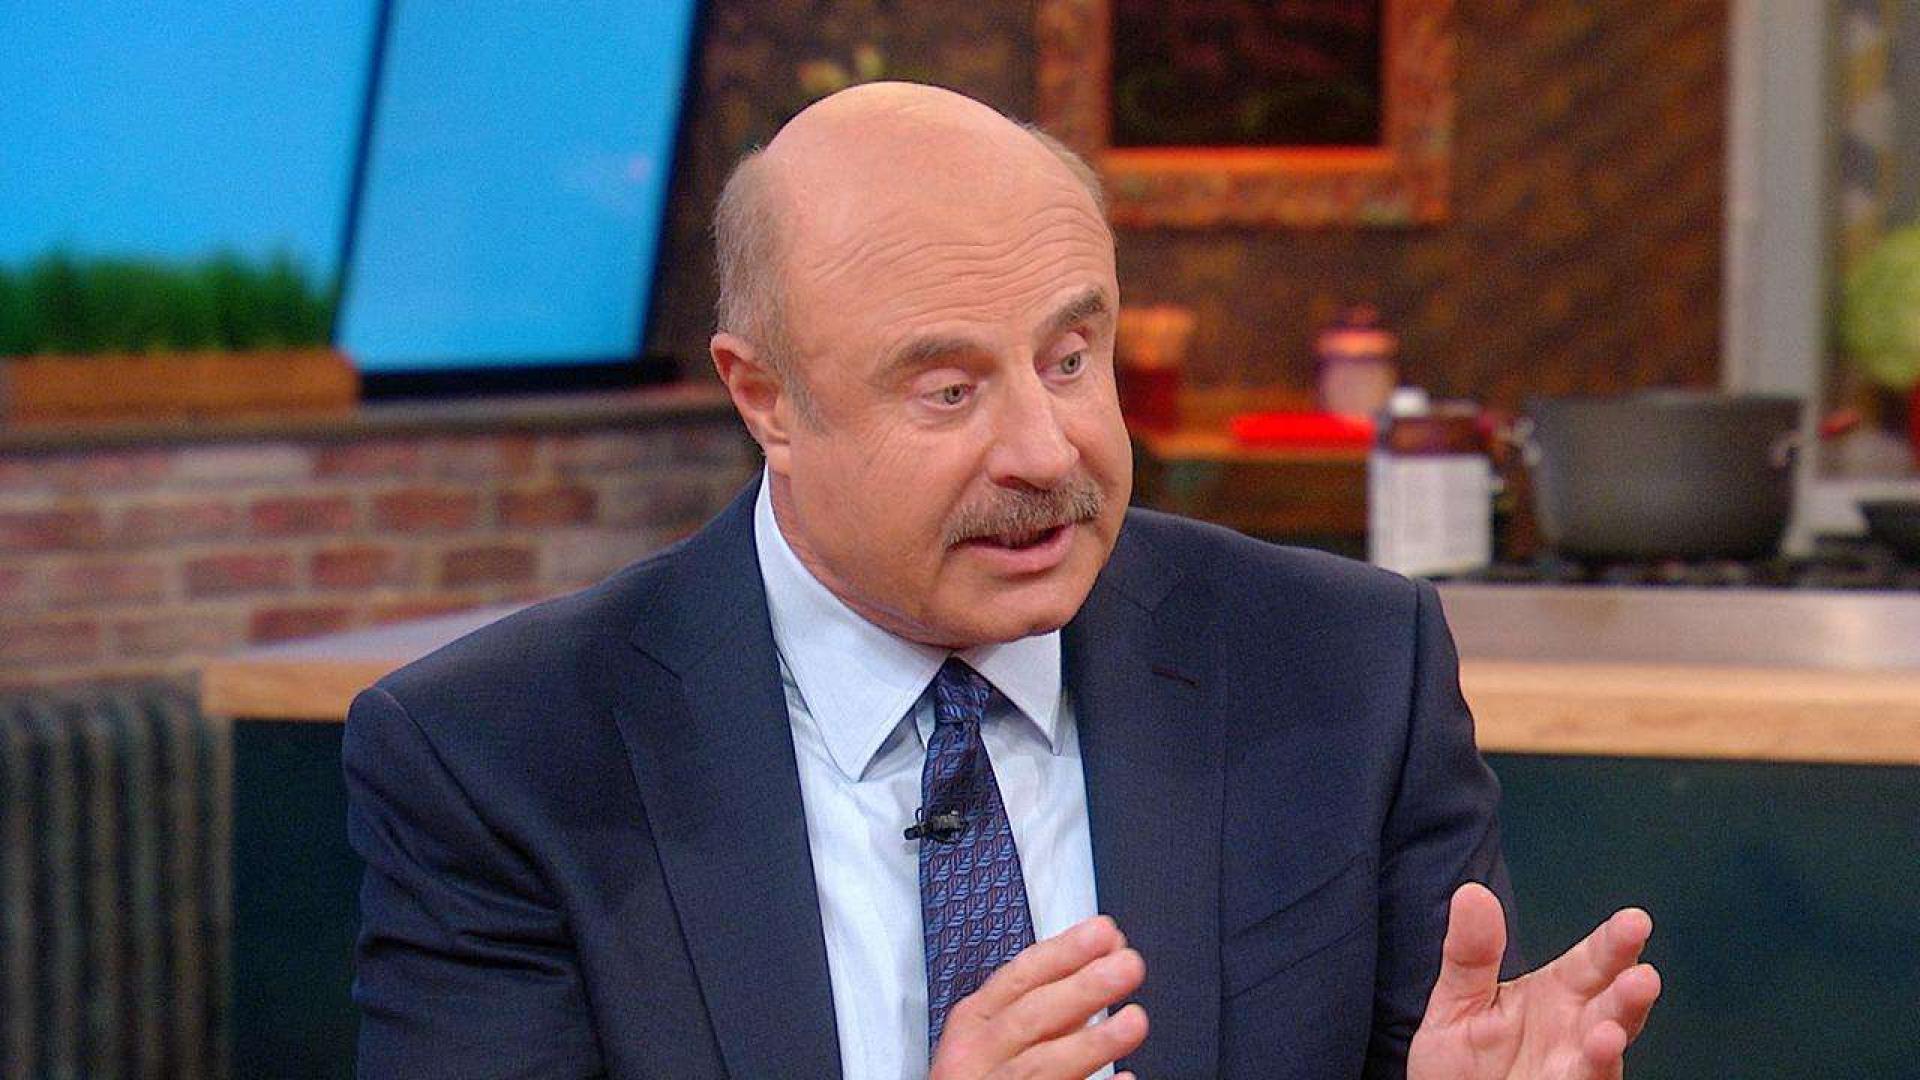 Dr. Phil On The Girl In The Closet: She learned to speak